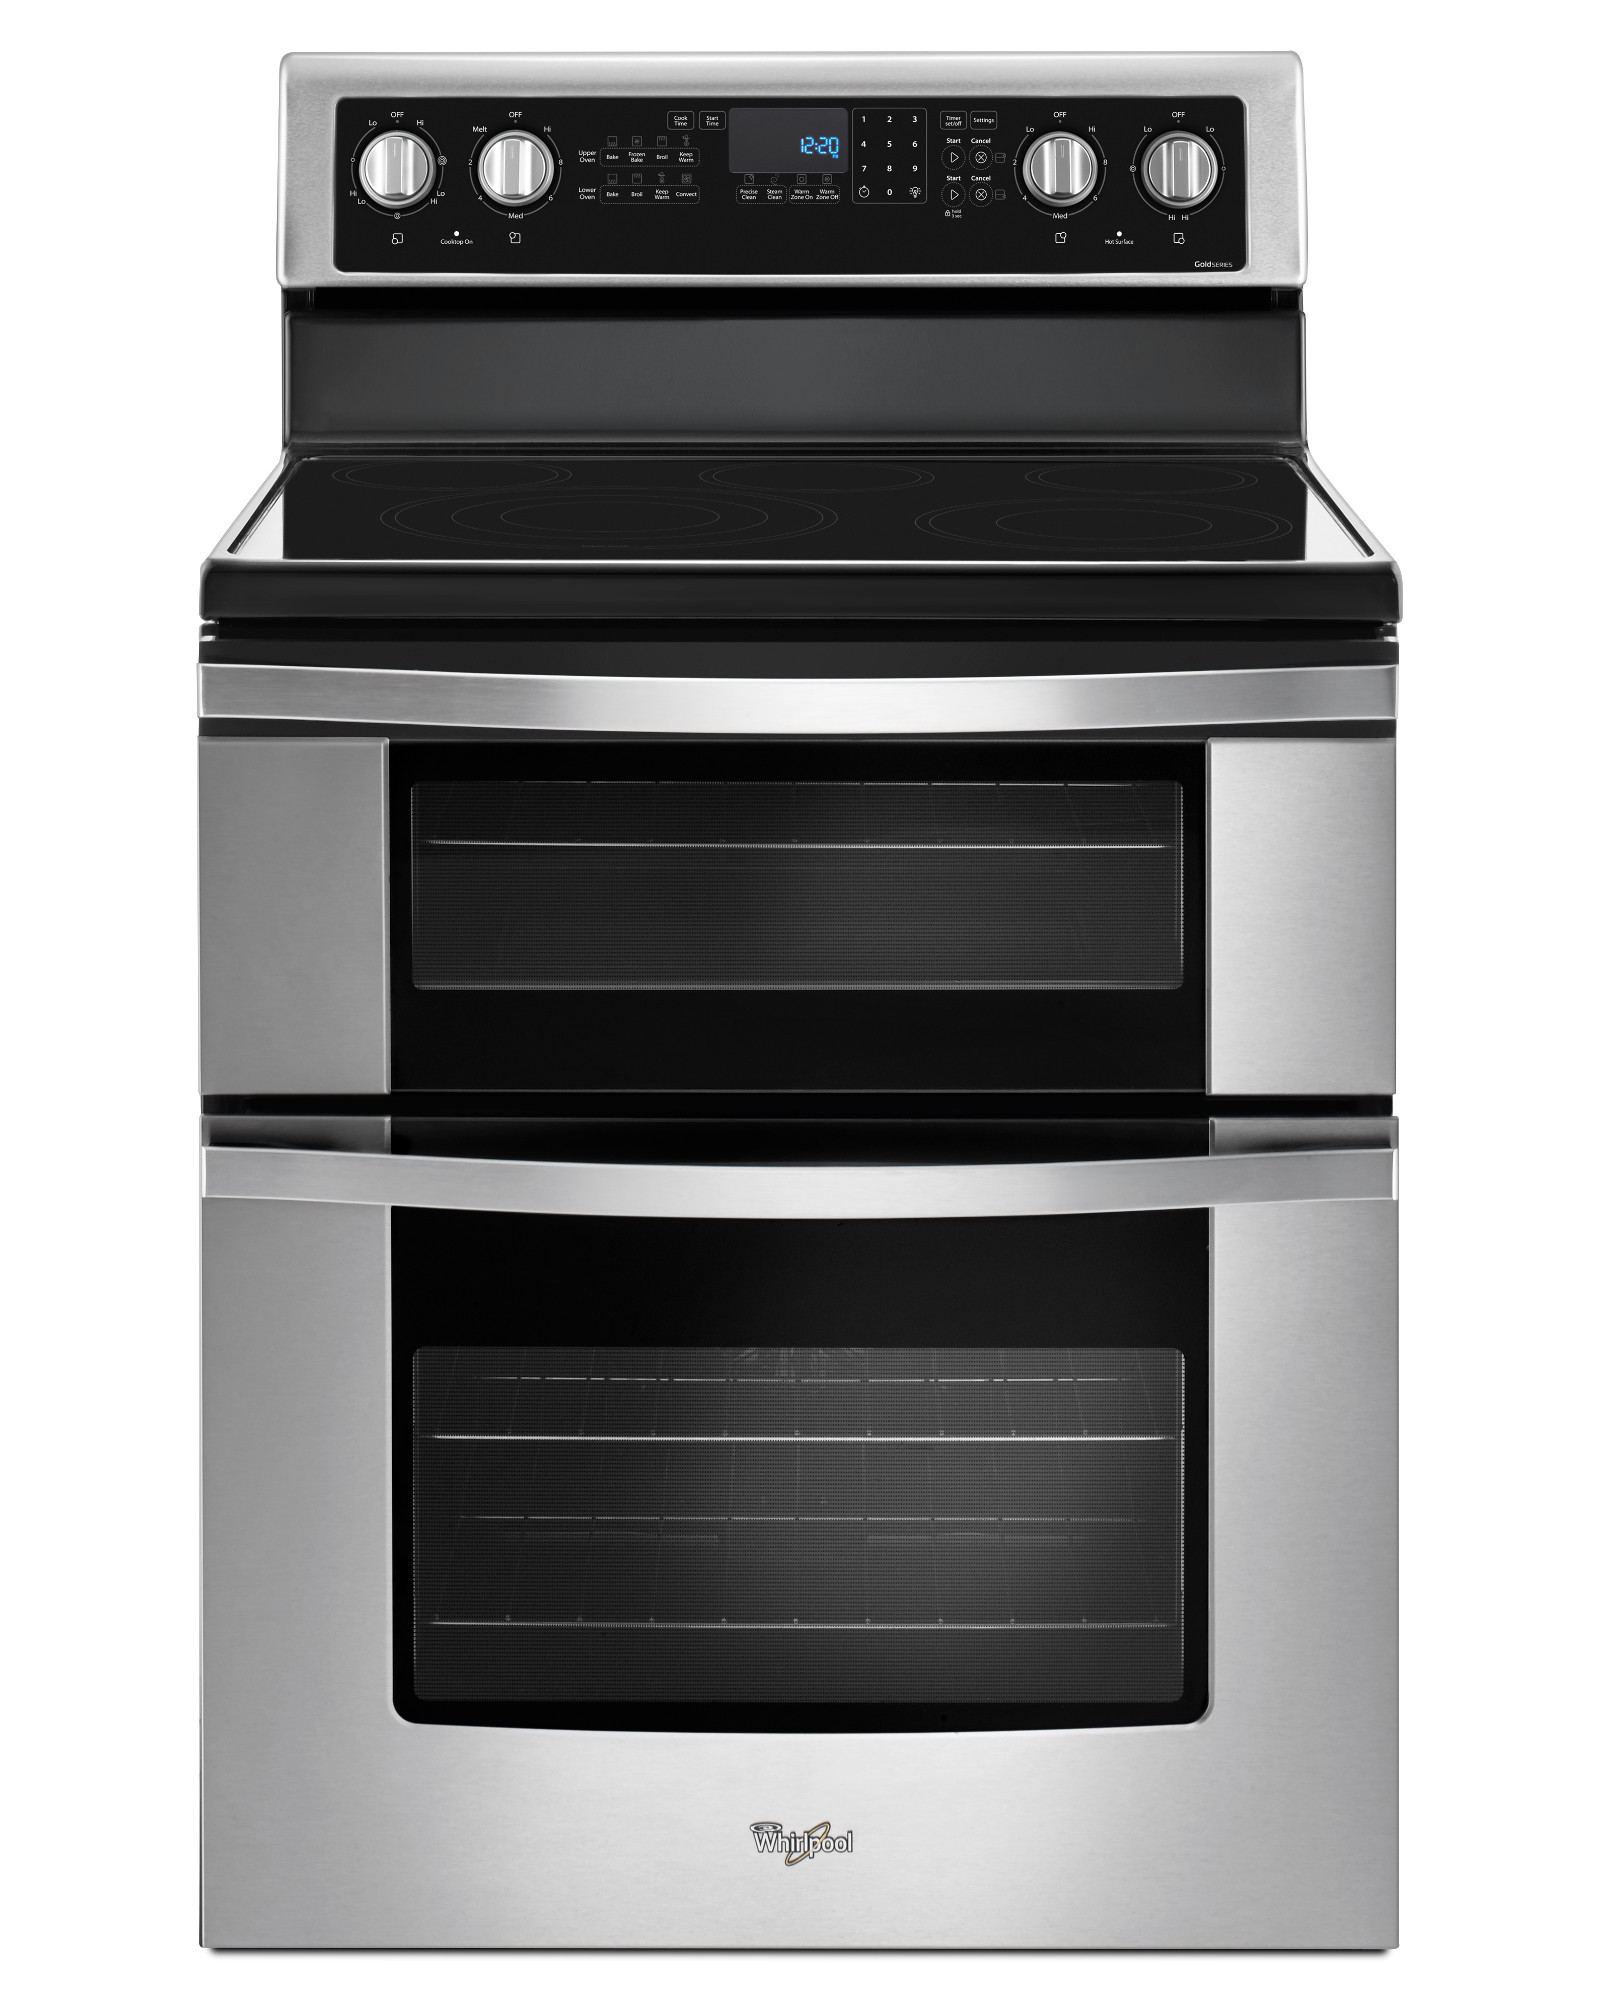 Whirlpool WGE745C0FS 6.7 cu. ft. Electric Double Oven Range with True Stainless Steel Electric Stove Whirlpool